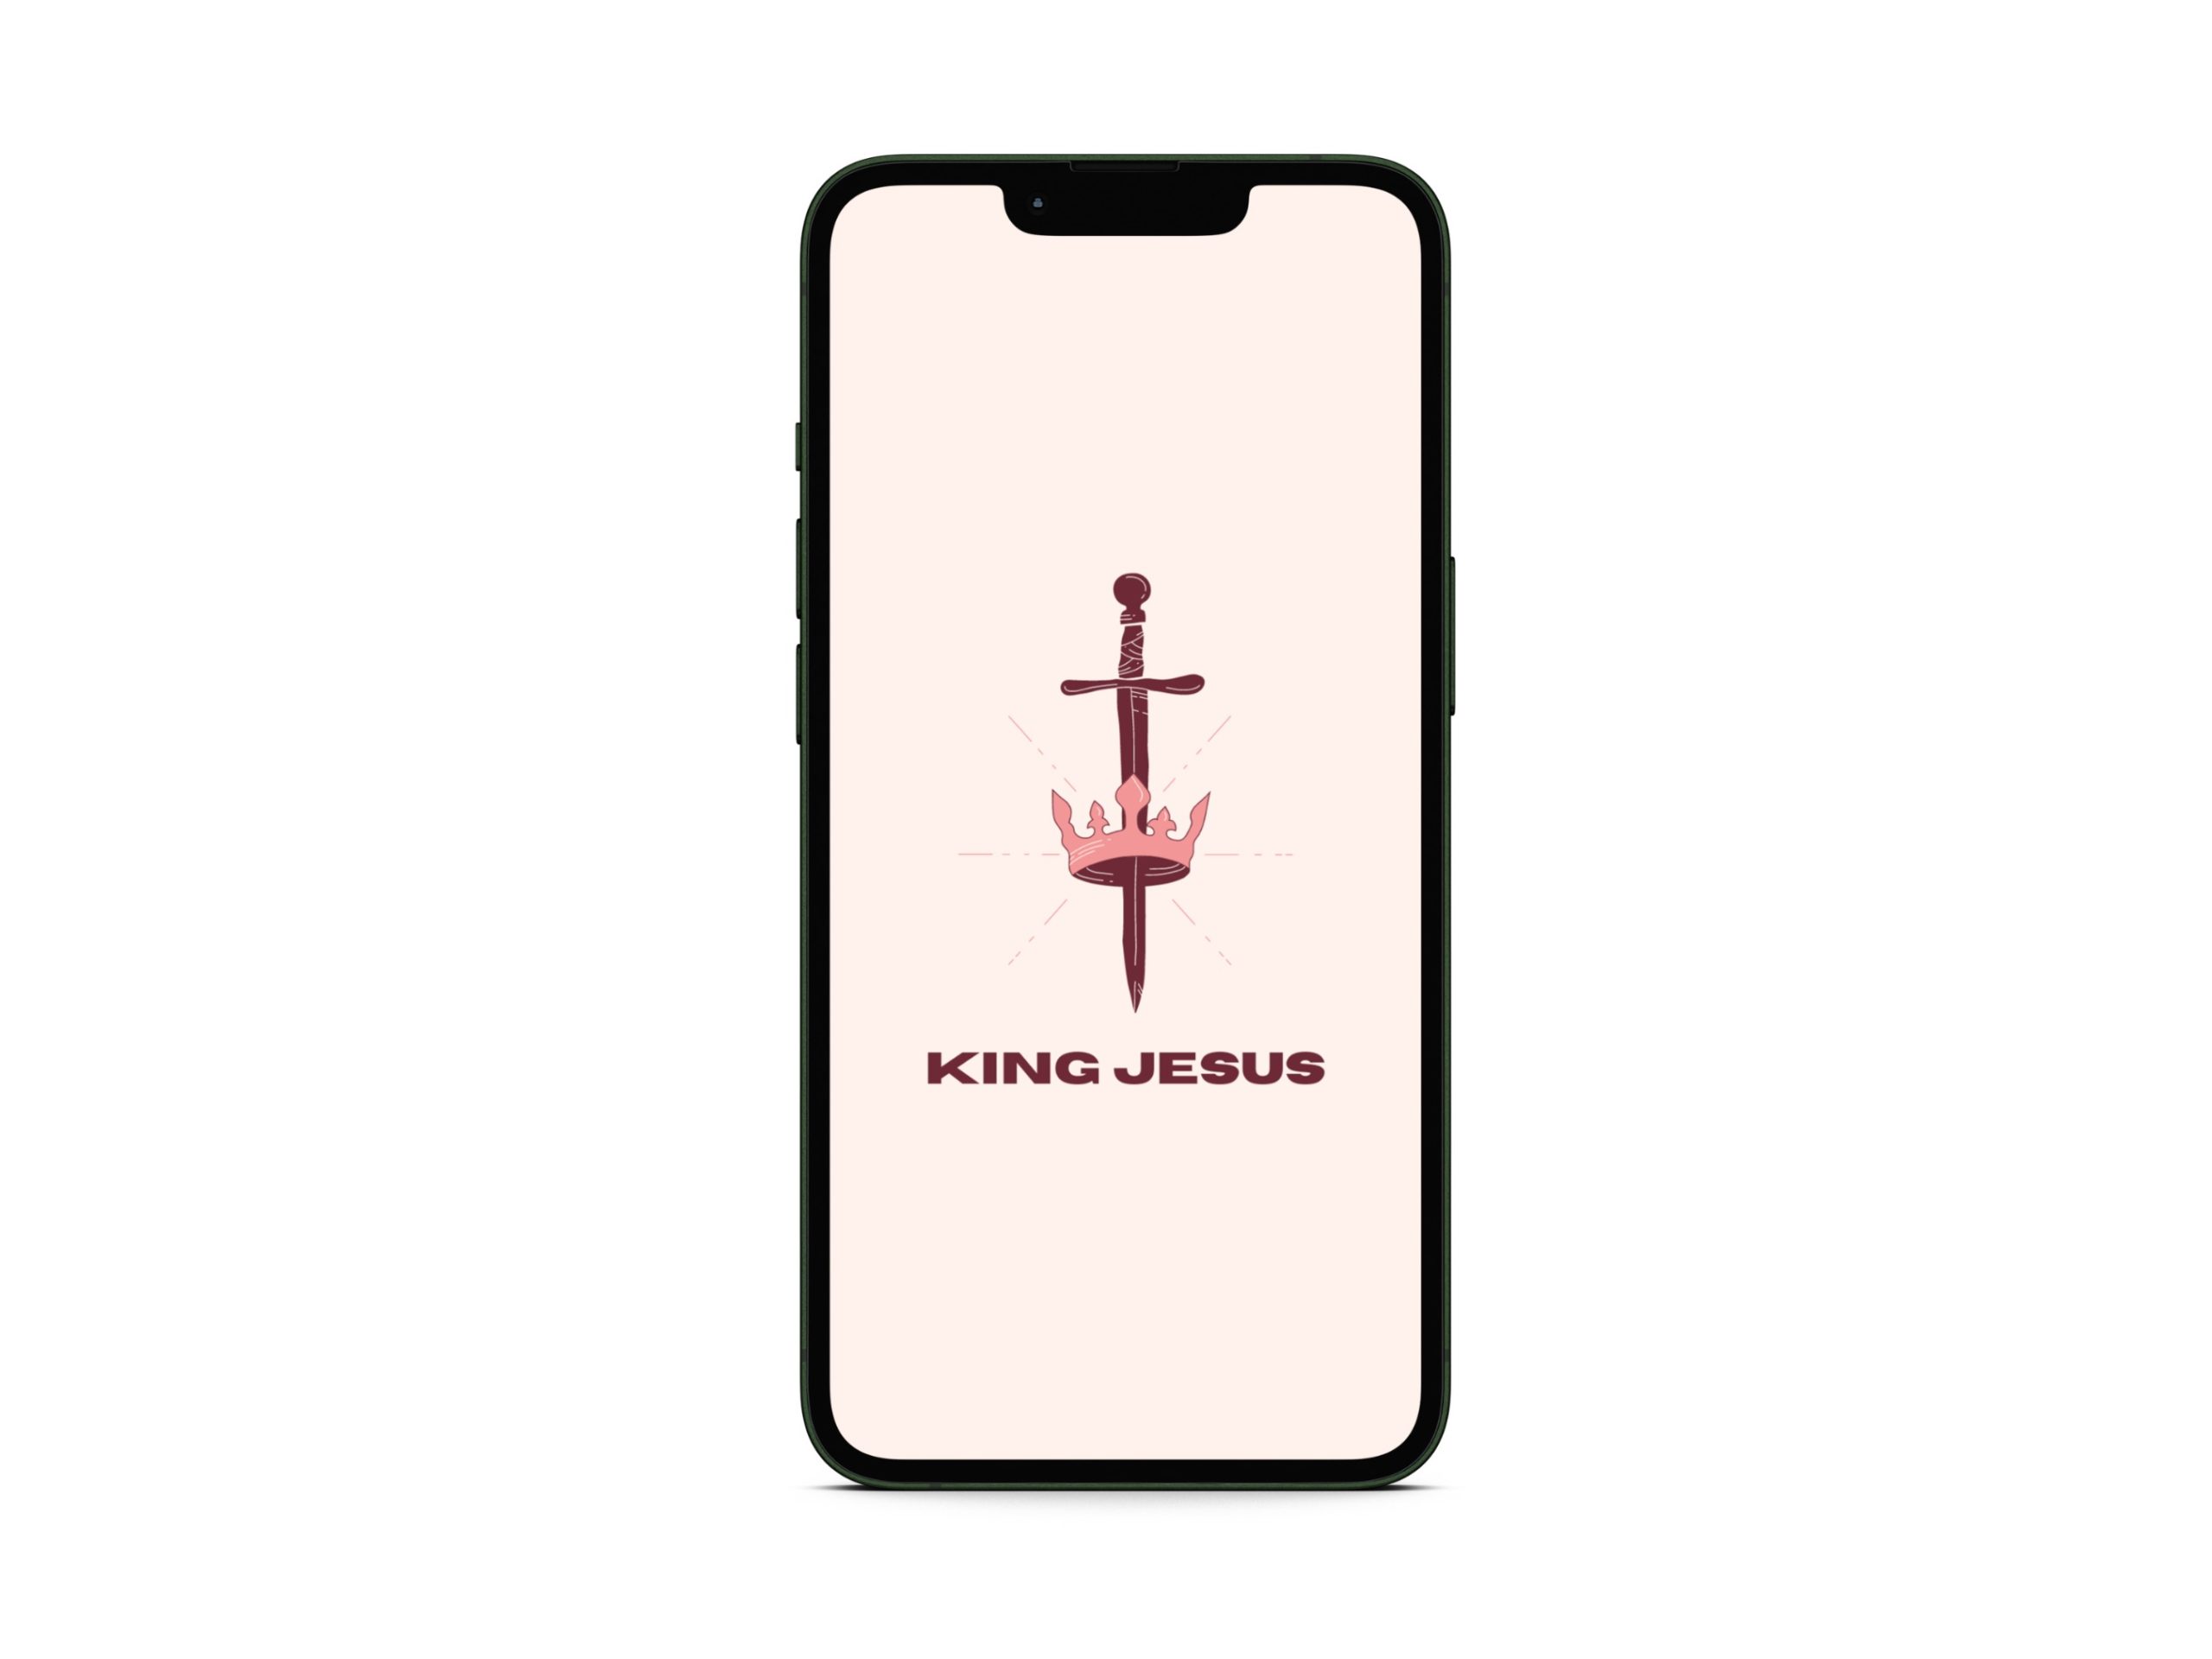 King Jesus Phone Wallpaper Set of 3 Pink Aesthetic - For All Is Through Him